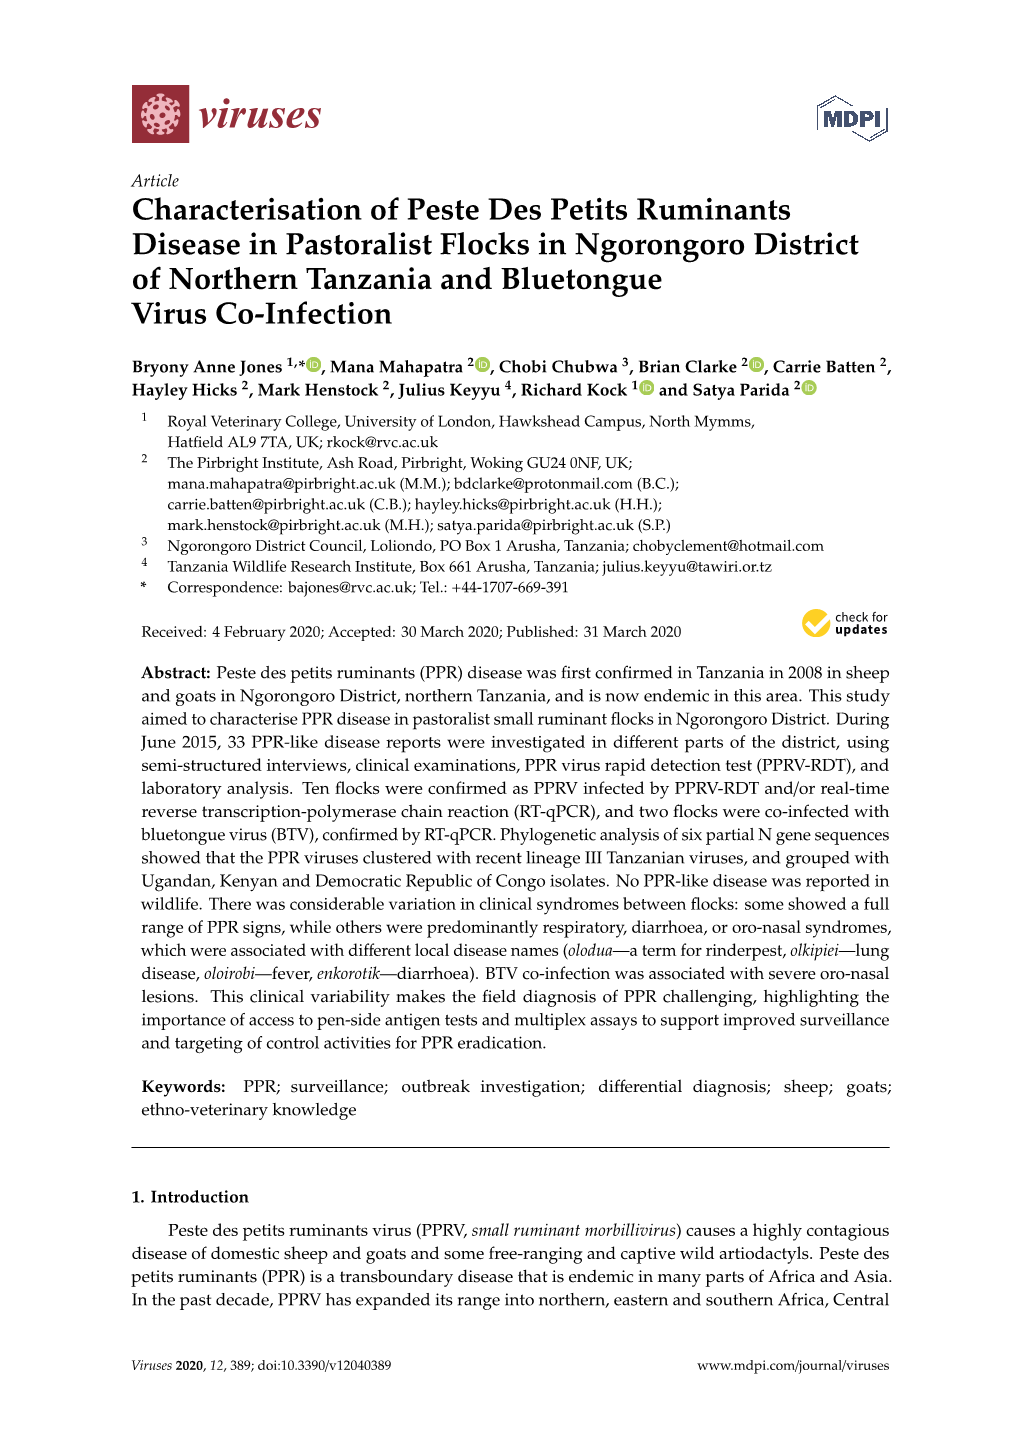 Characterisation of Peste Des Petits Ruminants Disease in Pastoralist Flocks in Ngorongoro District of Northern Tanzania and Bluetongue Virus Co-Infection